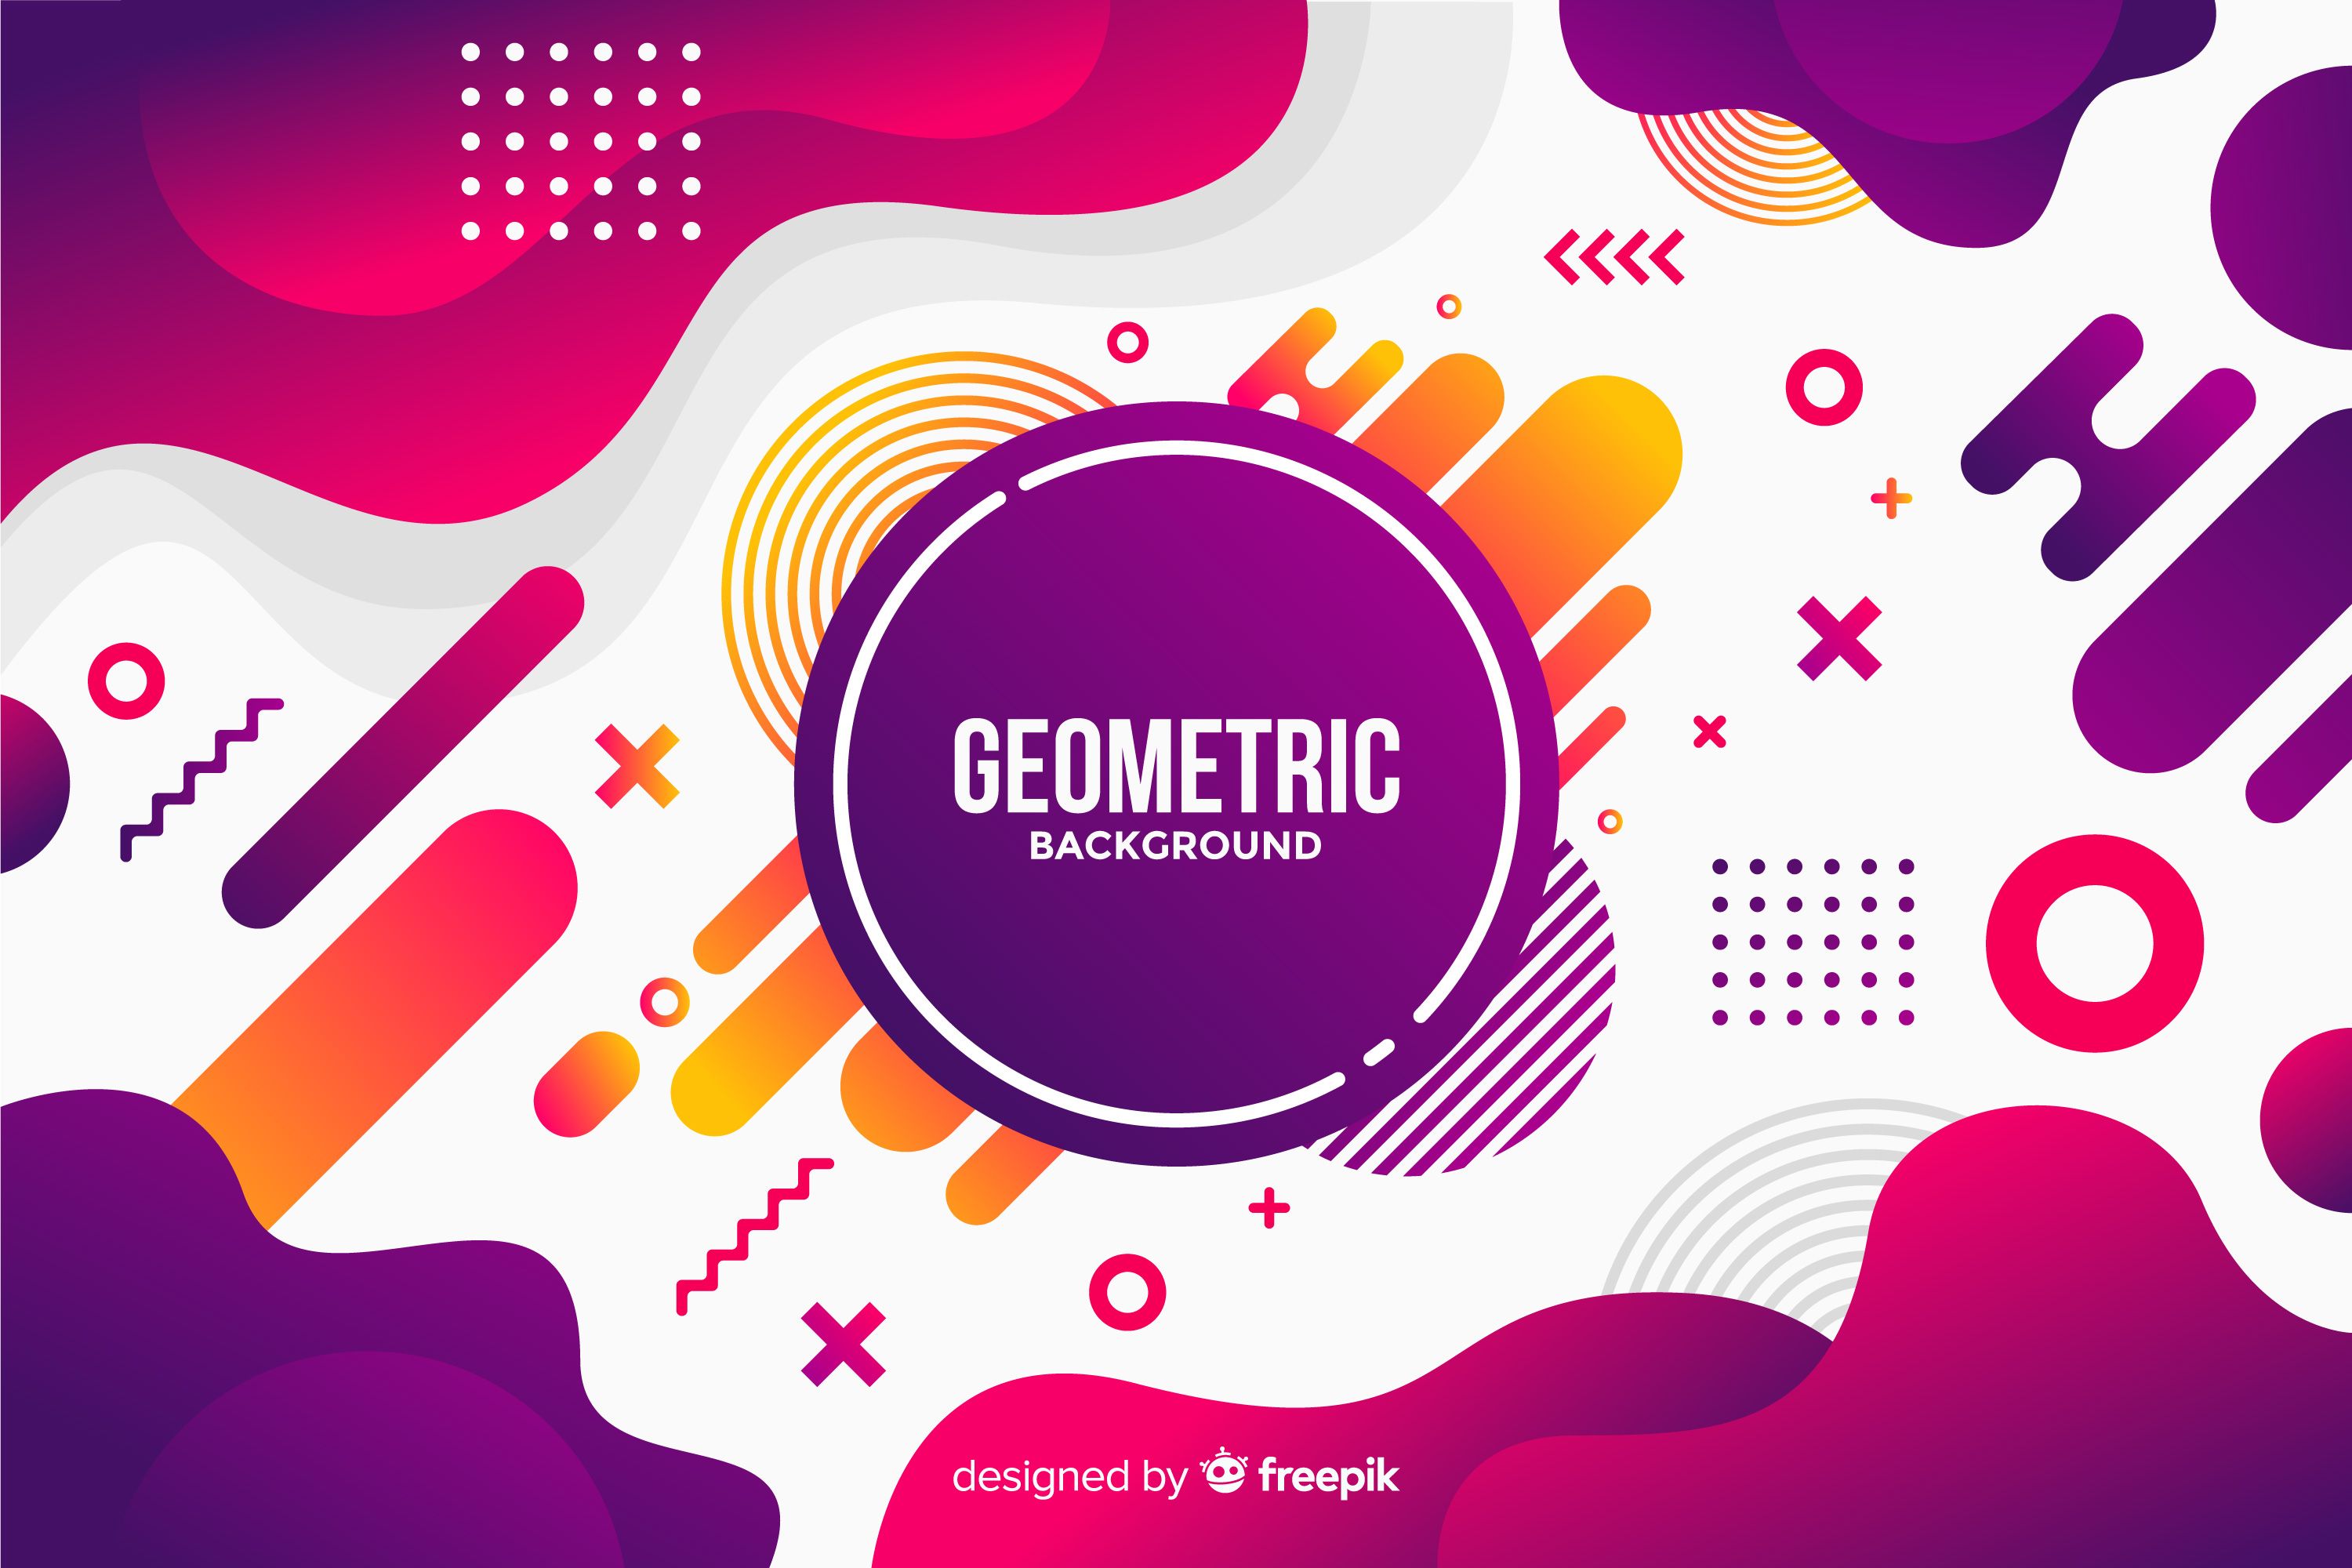 Geometric Background Poster Template Design